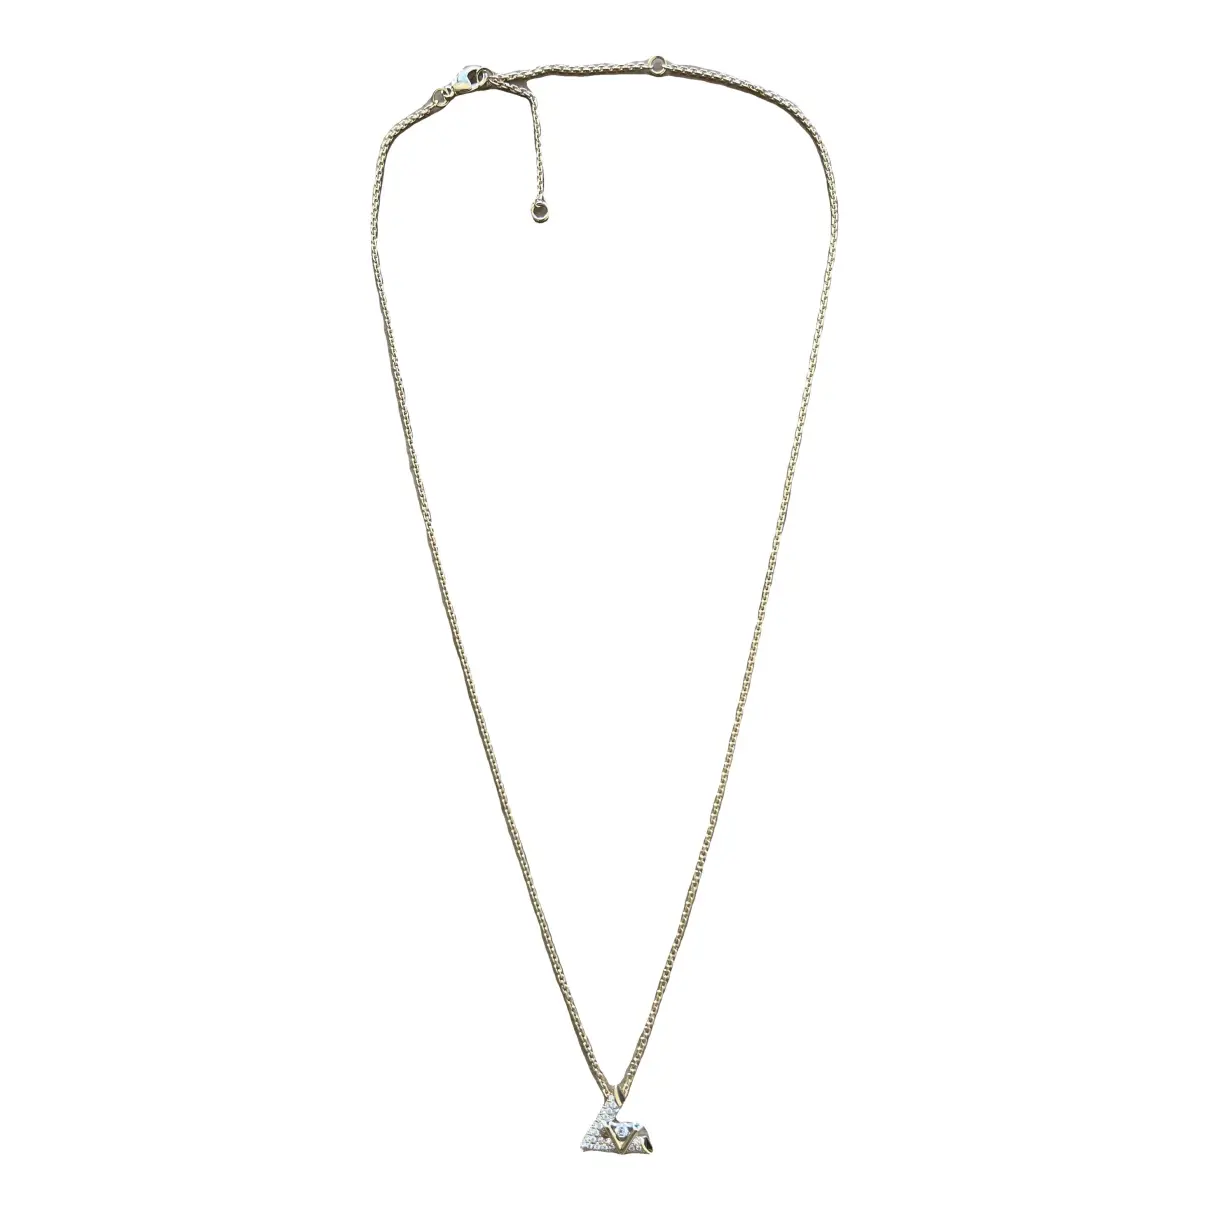 LV Volt One yellow gold necklace